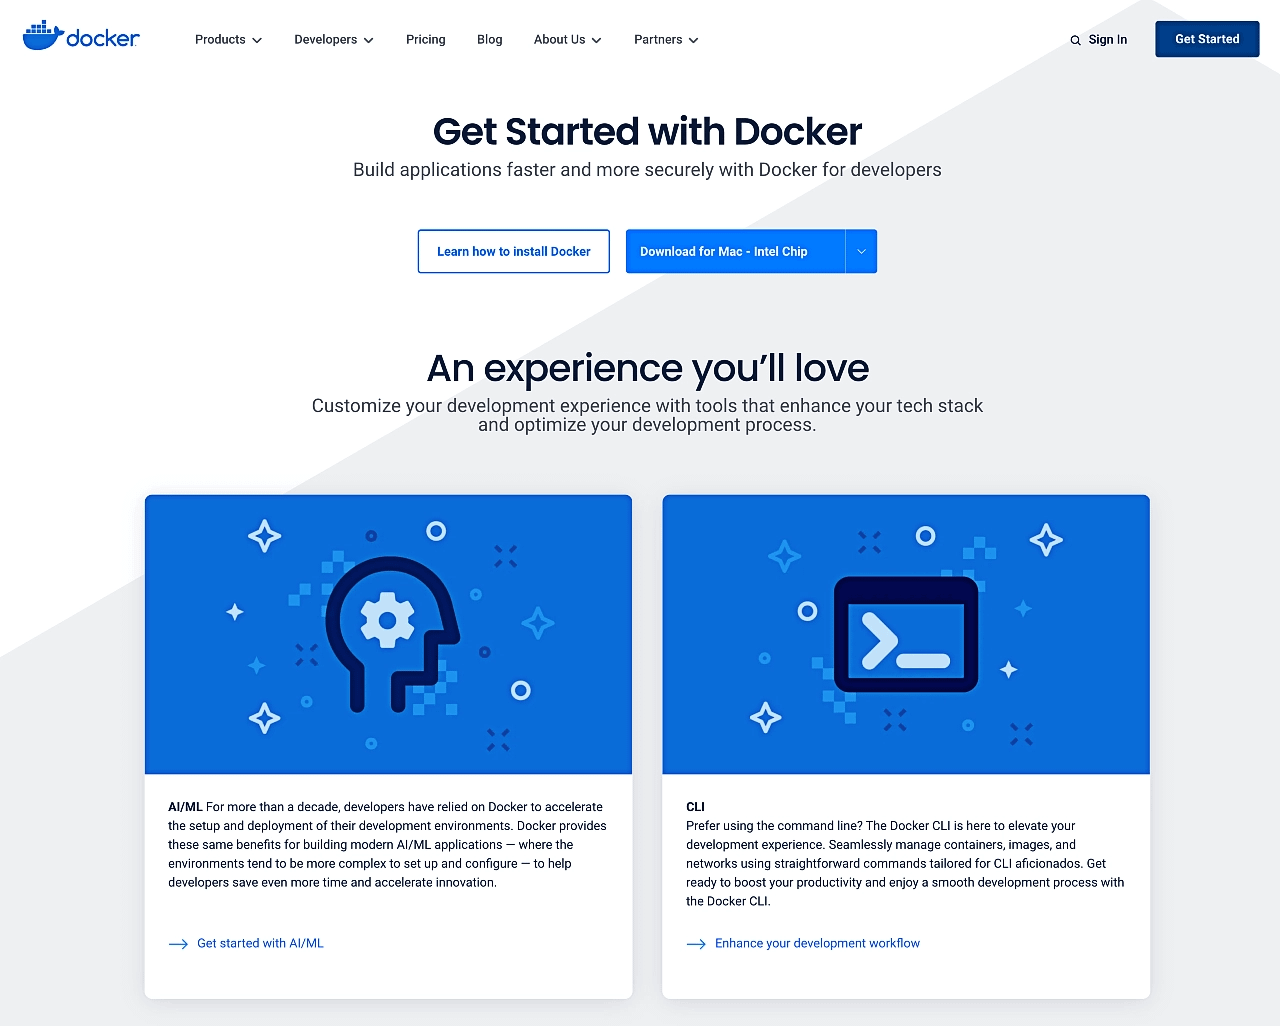 Docker's Getting Started Page